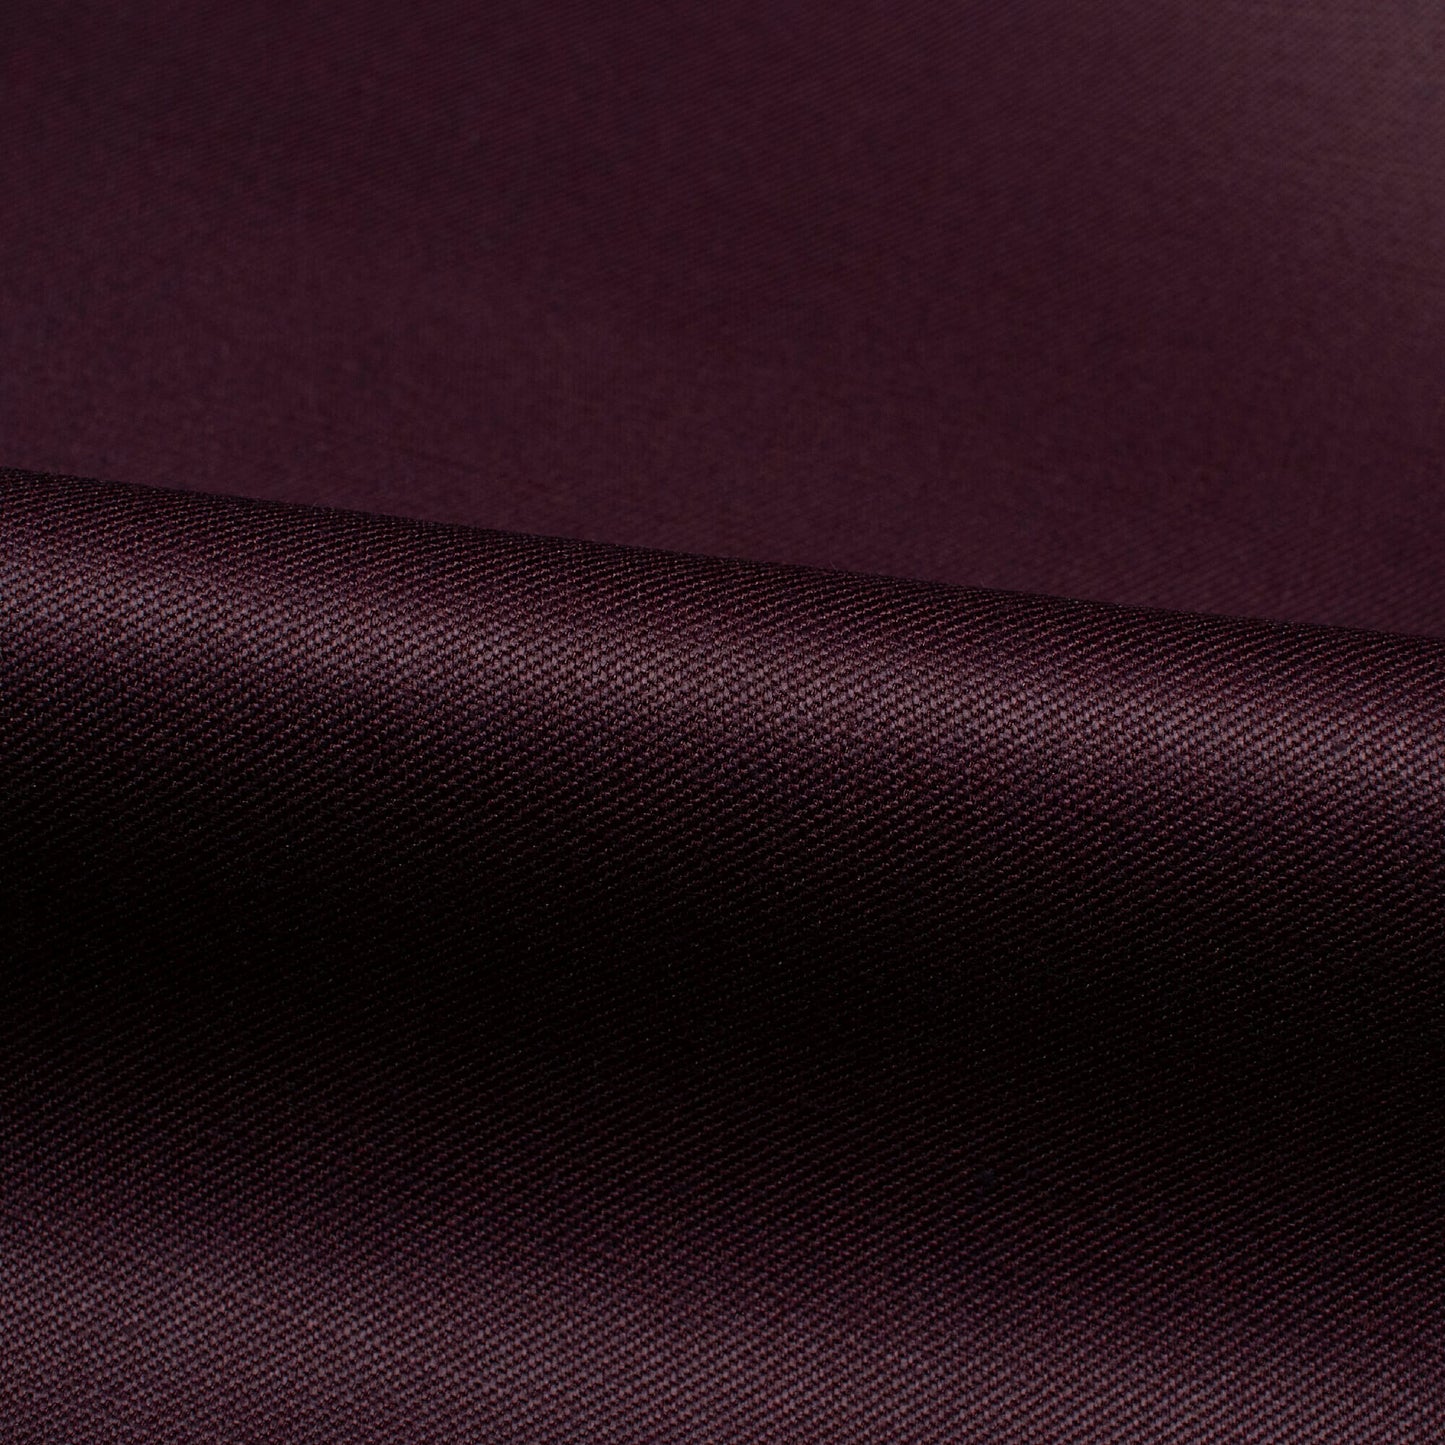 Maroon Plain Luxury Suiting Fabric (Width 58 Inches)